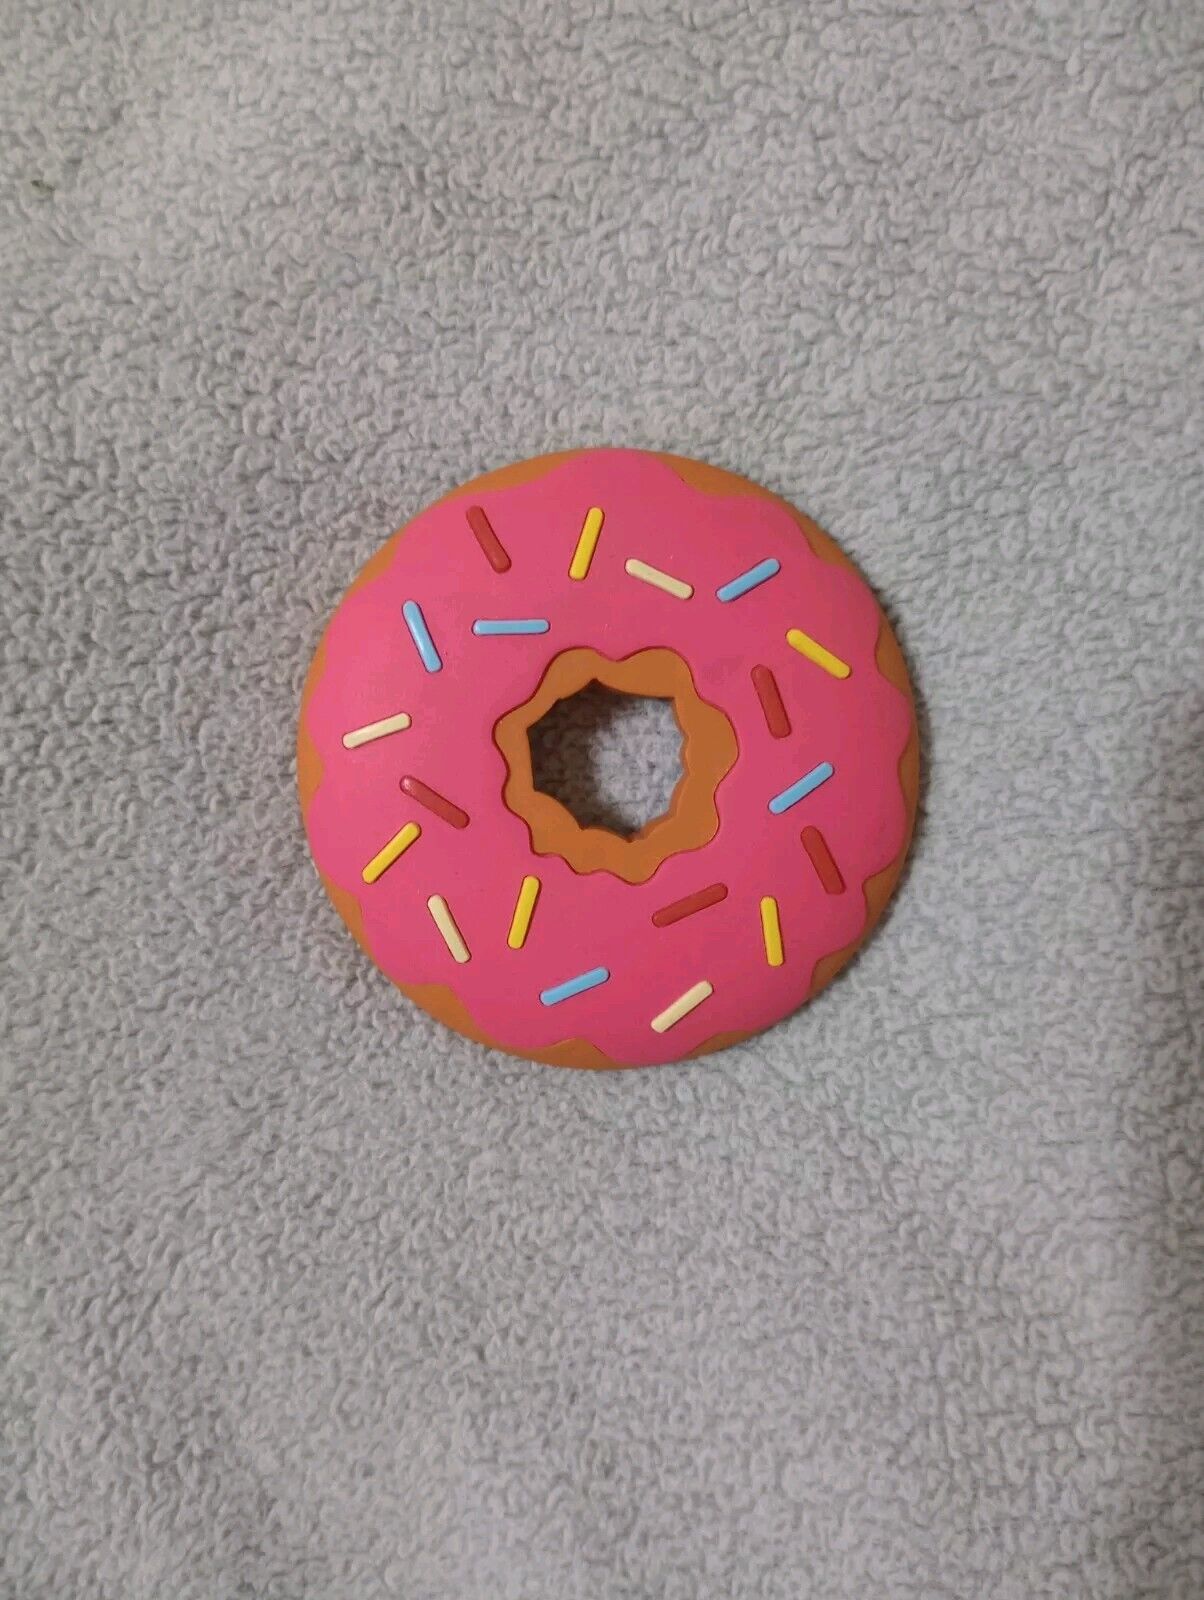 The Simpsons Universal Studios Exclusive Sprinkled Donut Magnet New